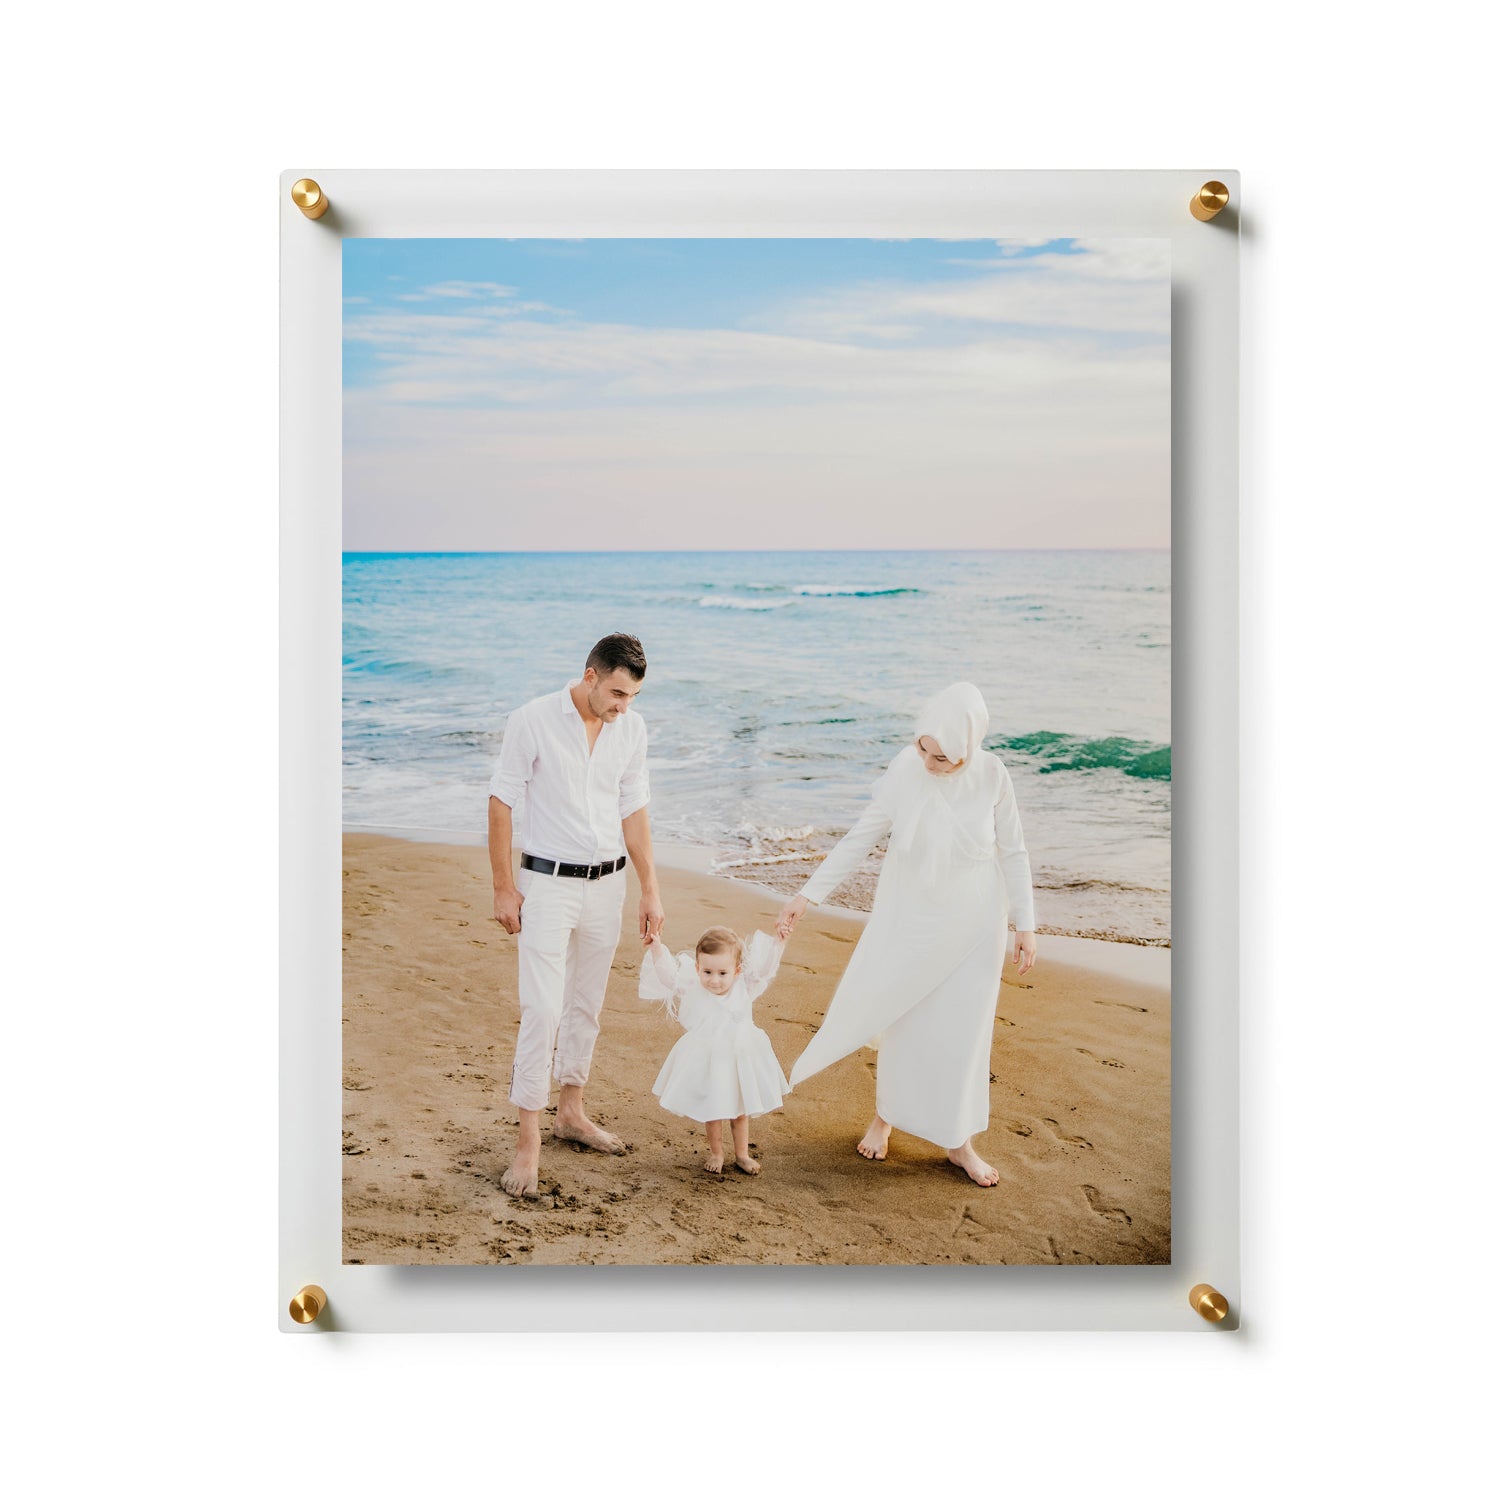 Wexel Art 34x44-Inch Double Panel Grade Acrylic Floating Frame with Silver Hardware for, 30x40-inch Art & Photos, Clear